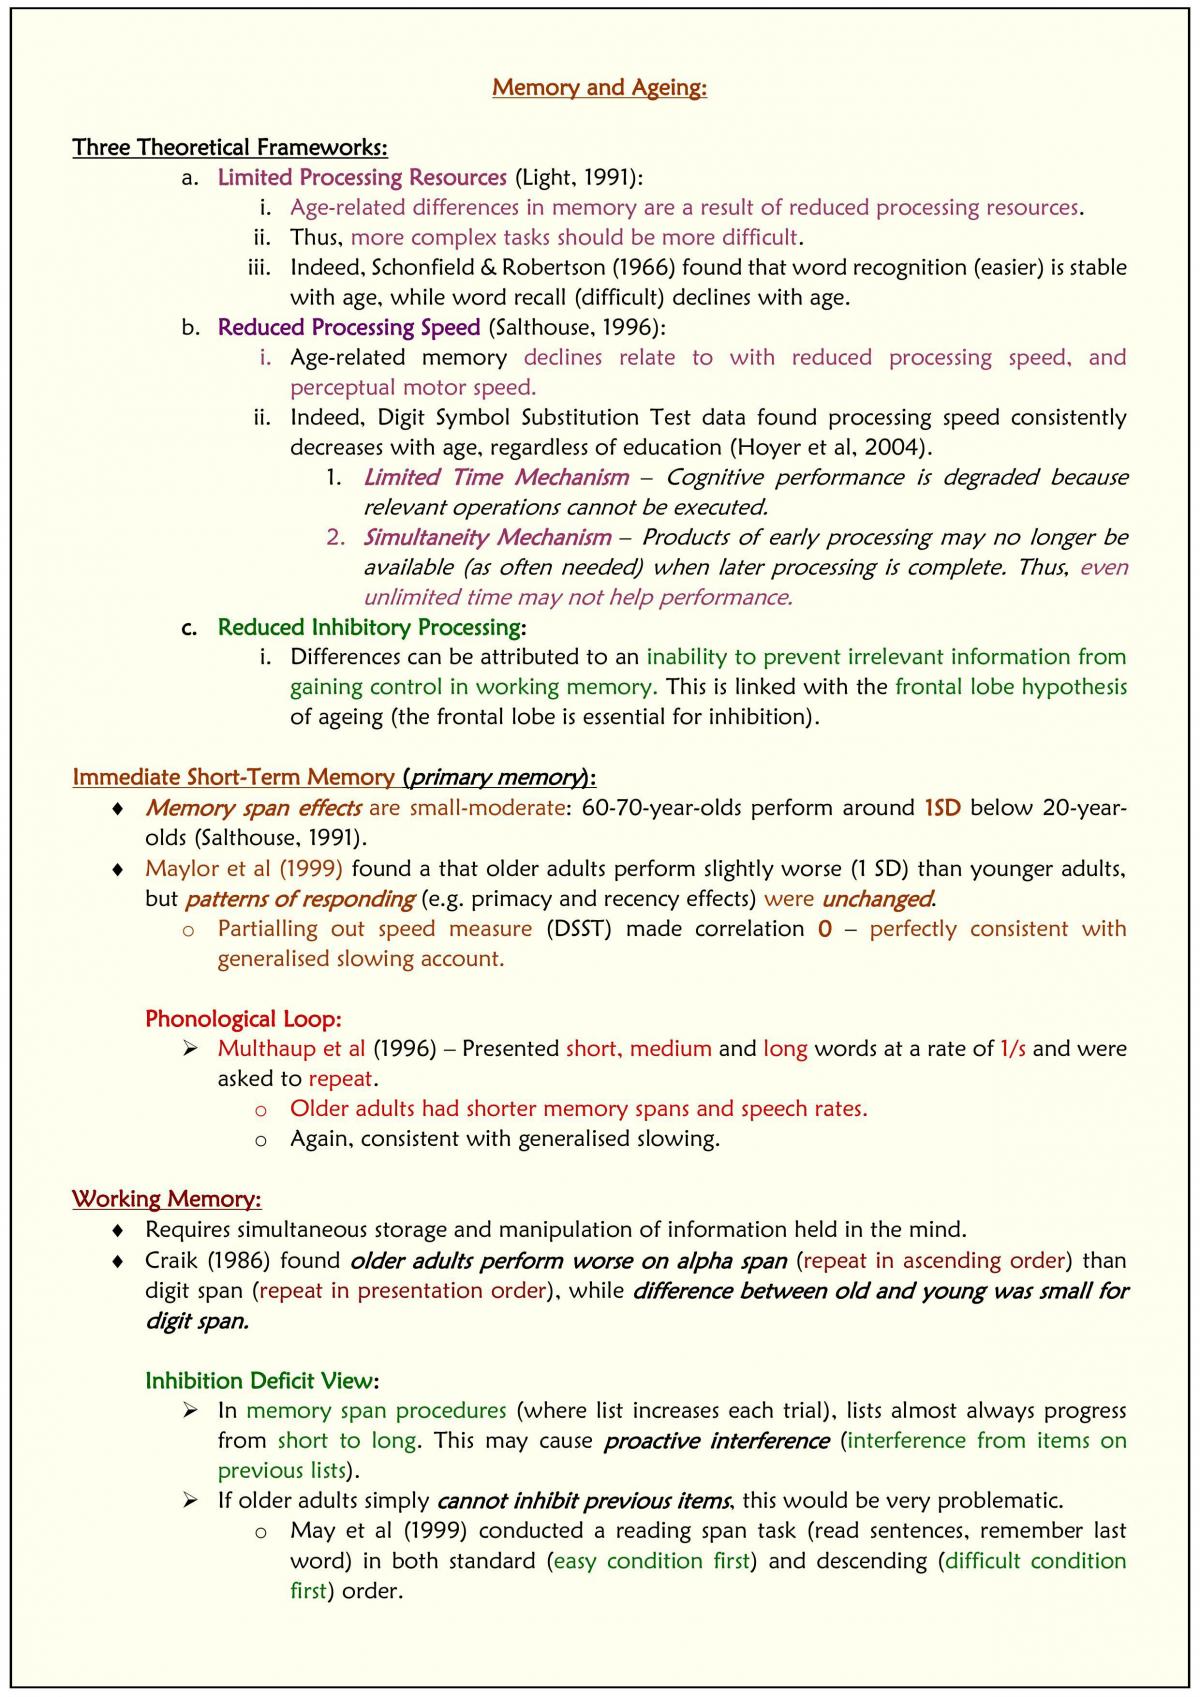 PS349: Psychology of Ageing Test Notes - Page 21